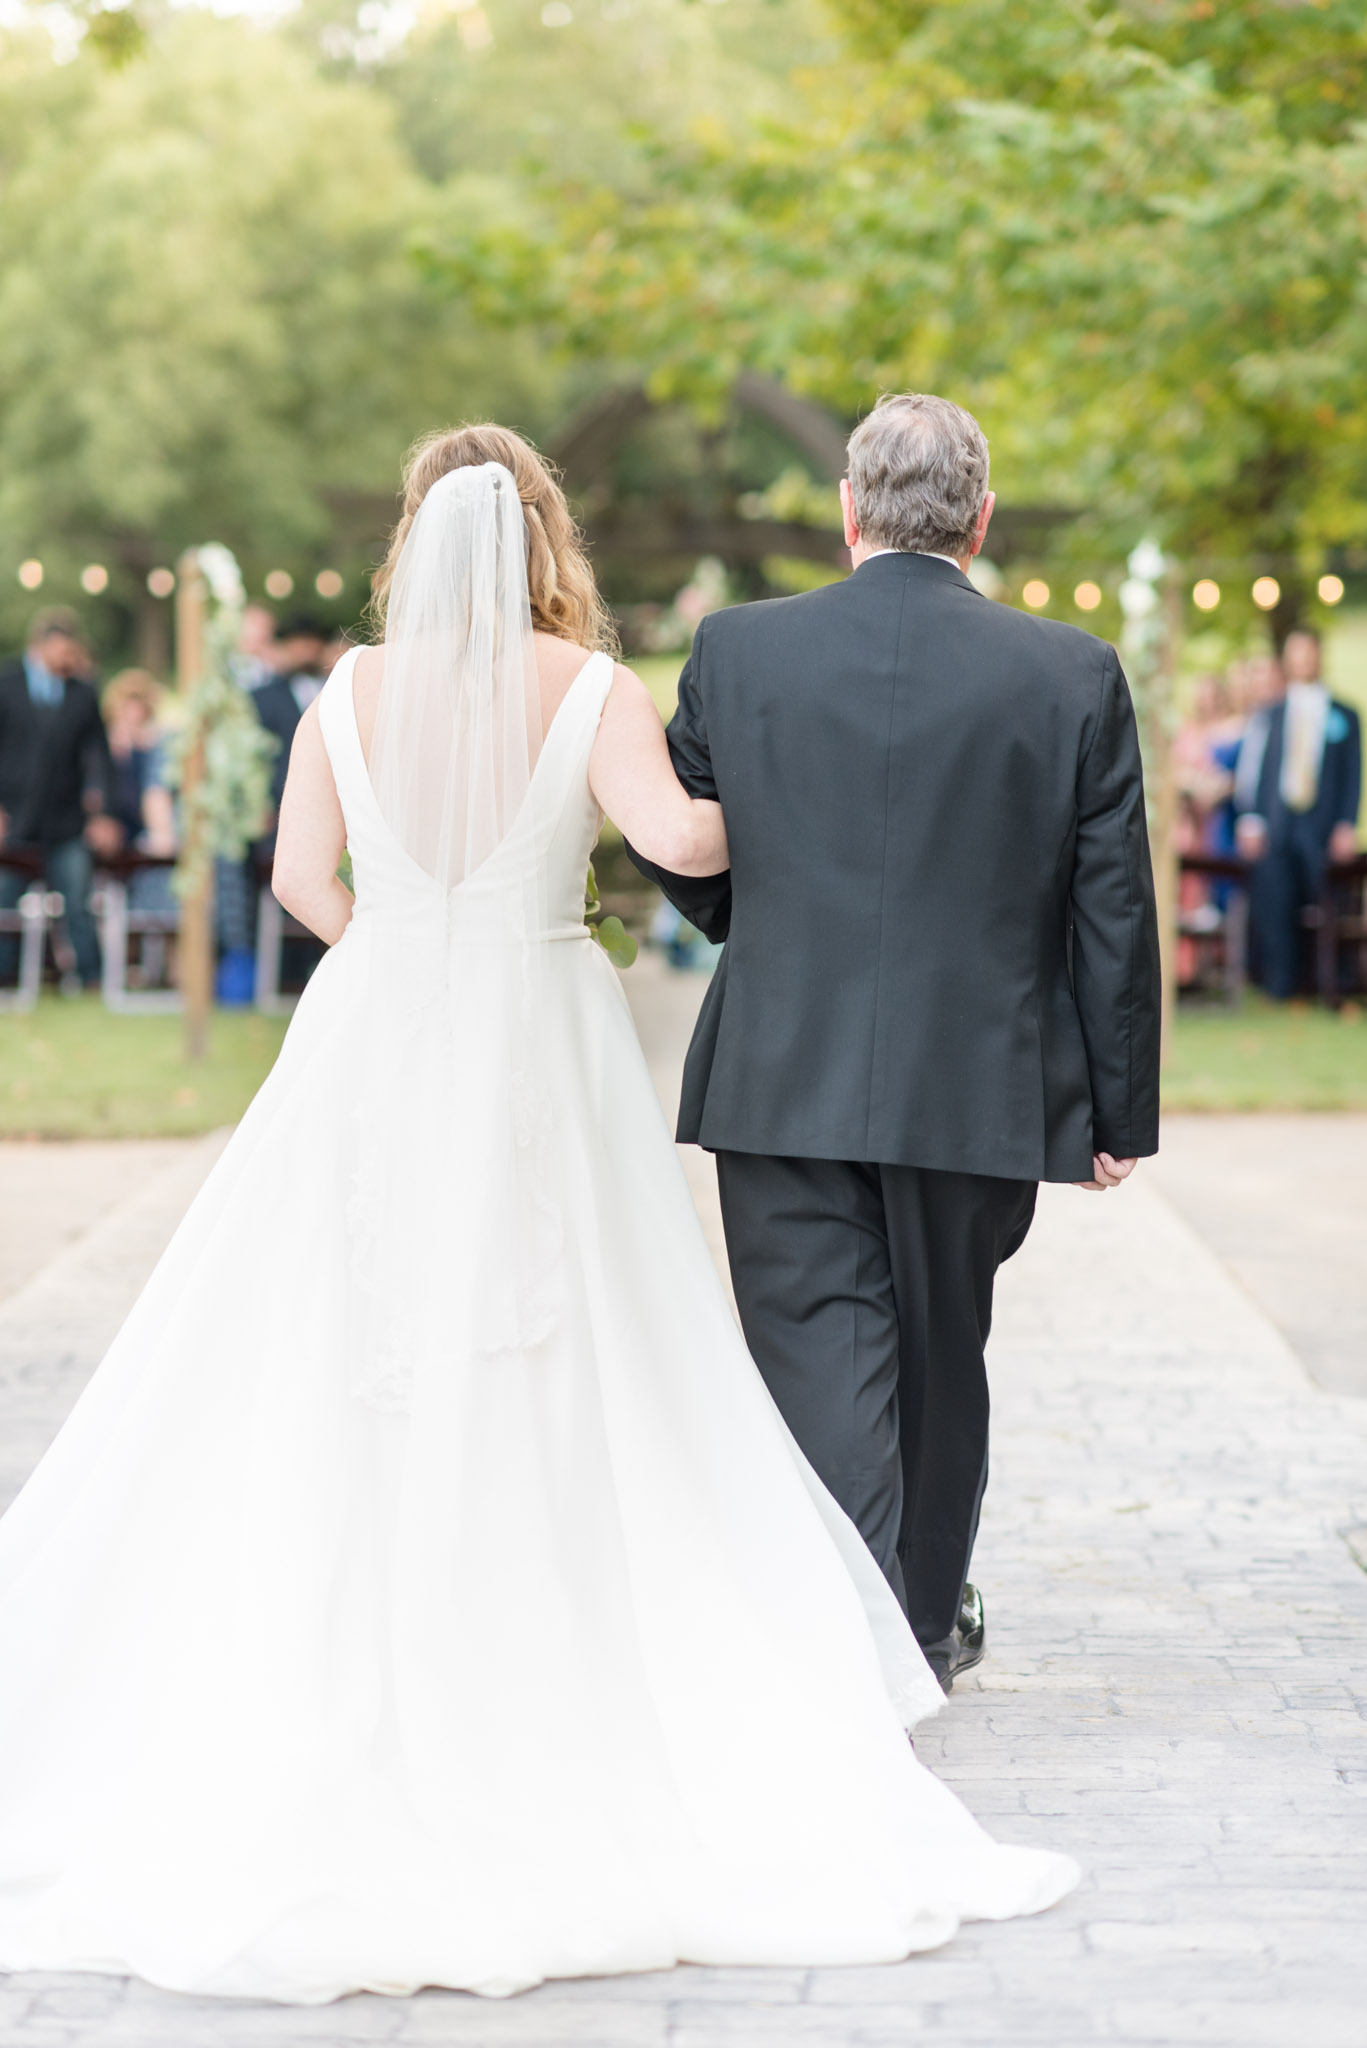 Bride and father walking down aisle.